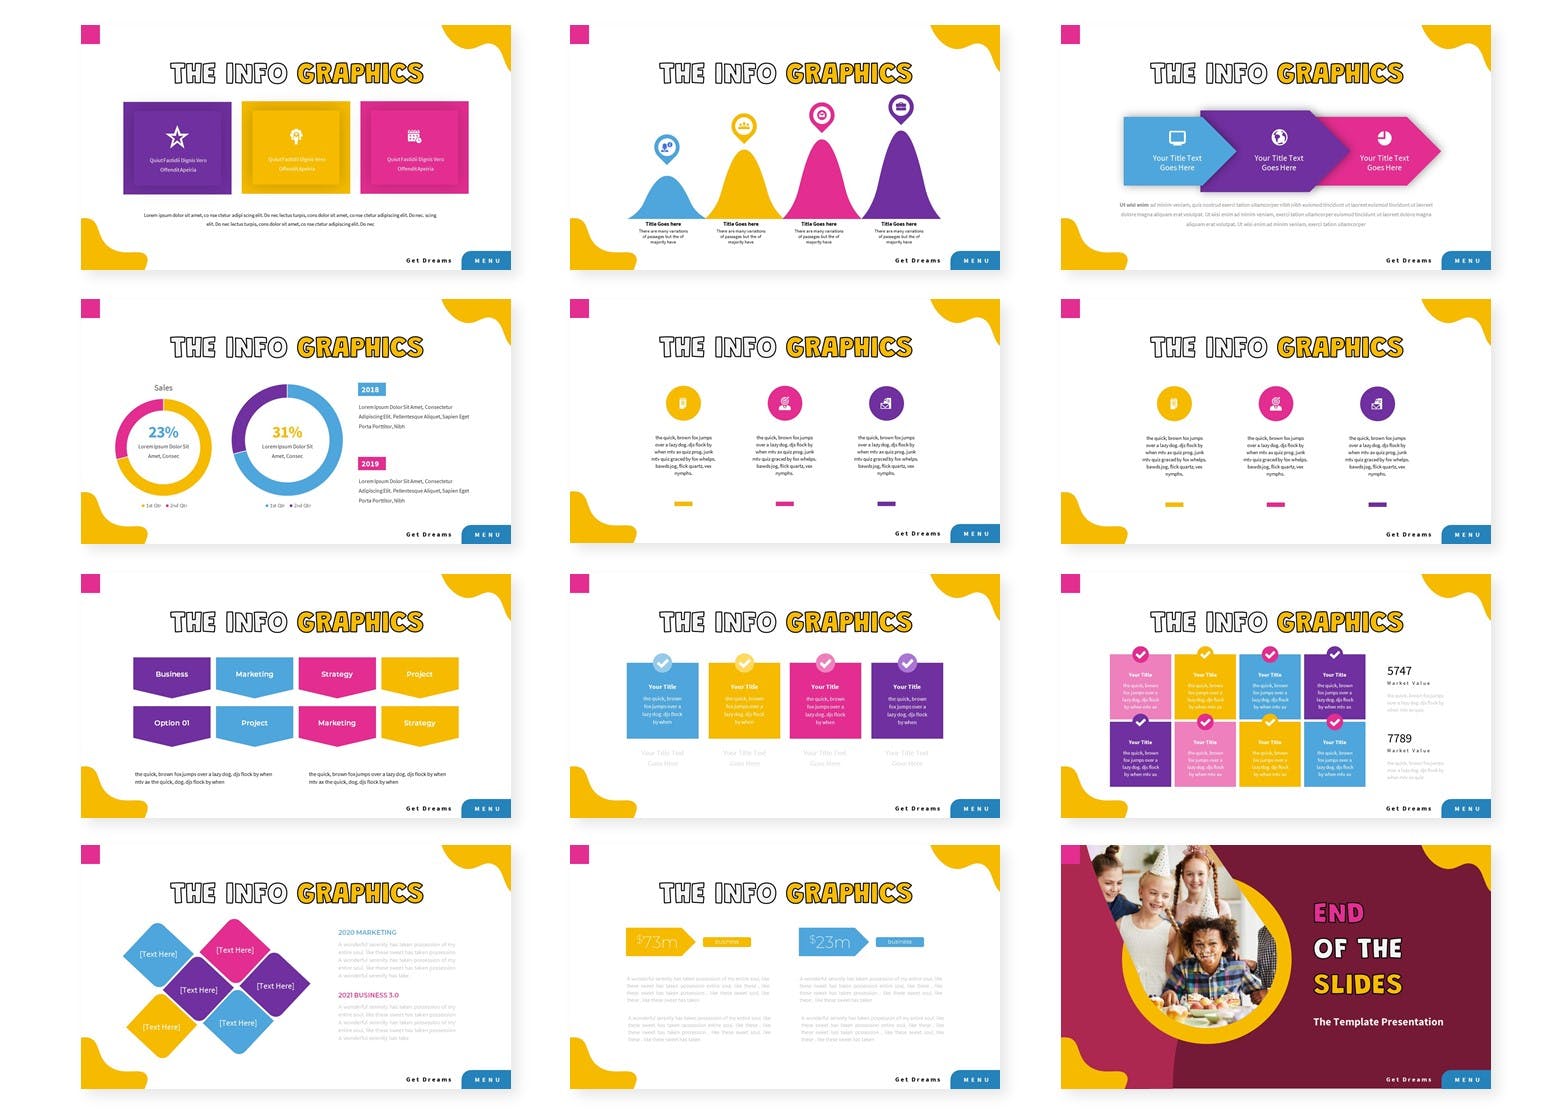 It includes a lot of colorful infographics.